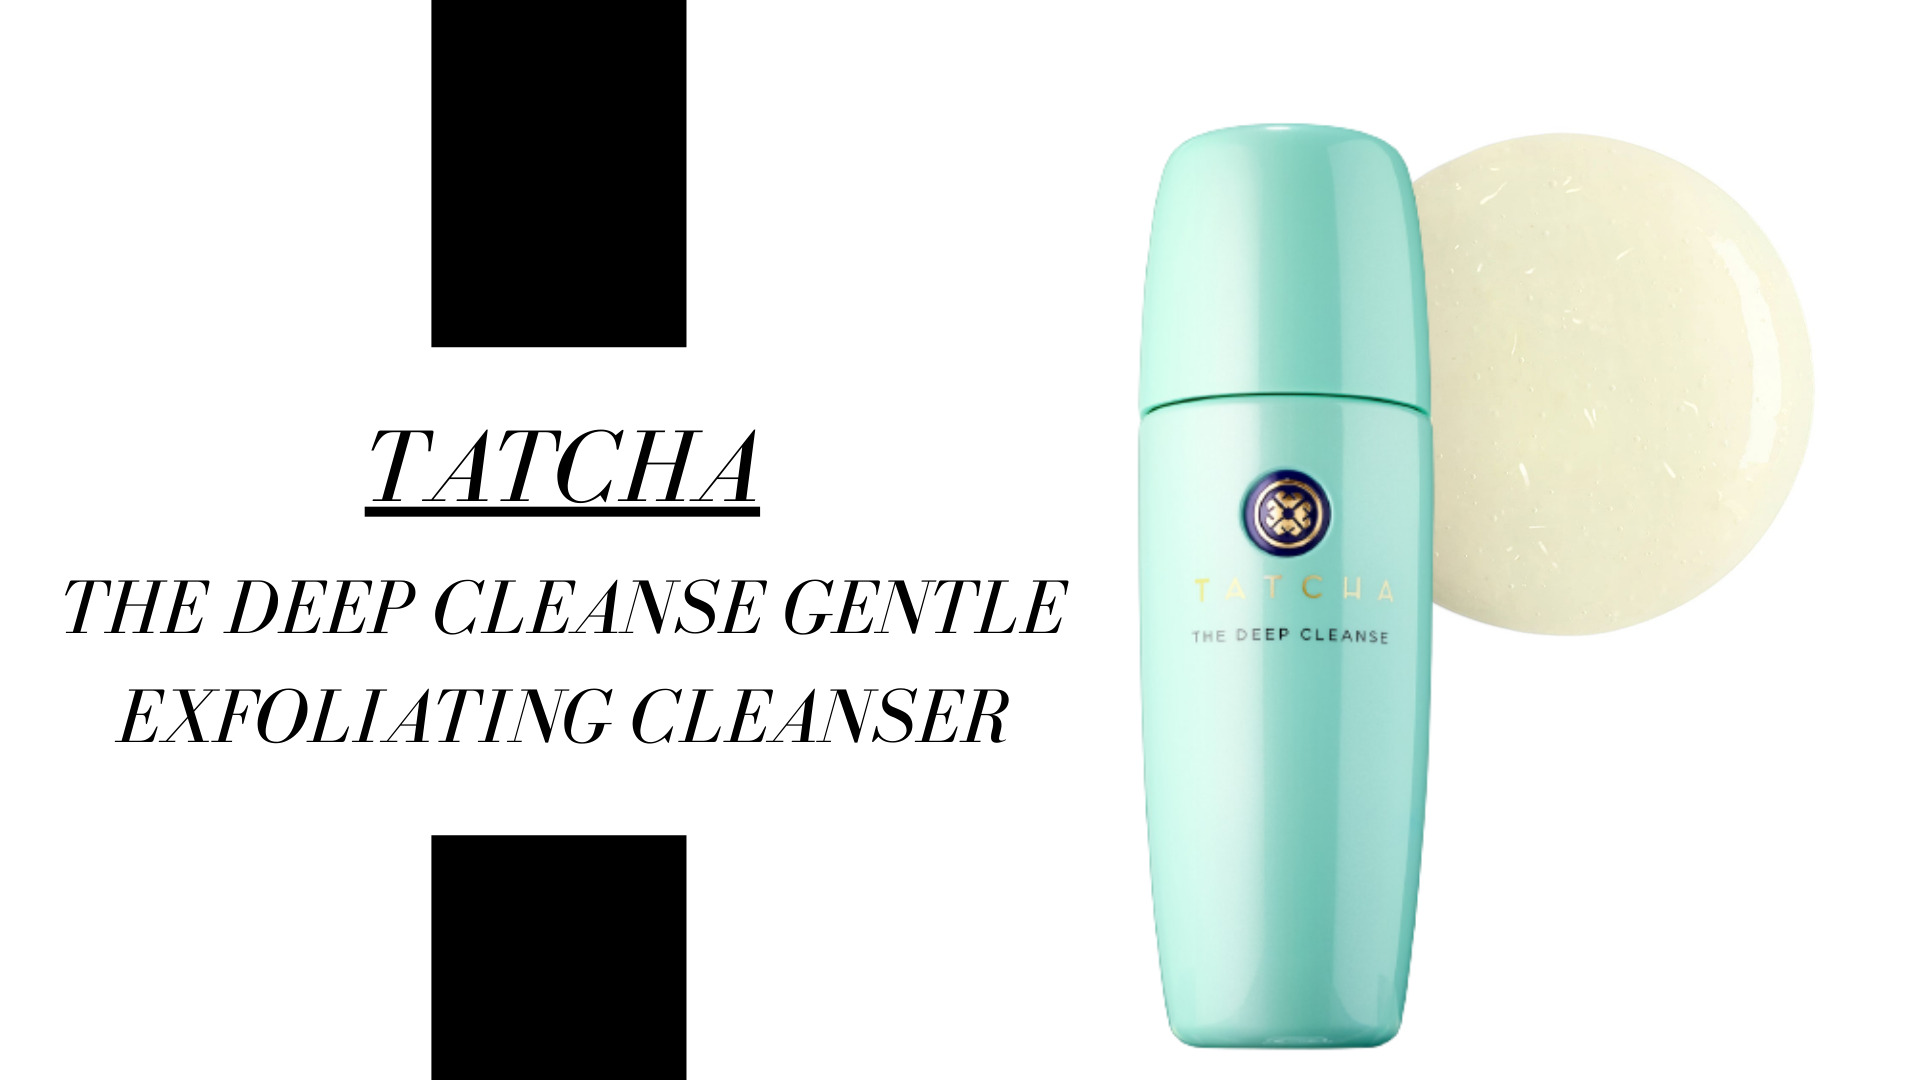 The Tatcha cleanser is the perfect one for those rich and glamourous skincare routines. It works wonders on both normal, oily, combination, and sensitive skin types. The gel formula contains a natural fruit exfoliant that thoroughly lifts impurities and unclogs pores while leaving your skin soft and hydrated. These properties make this product perfect if your main concerns are pores, dullness, uneven texture, and oiliness. Plus, this pure, oil-free formula is non-irritating, non-sensitizing, dermatologist-tested, and cruelty-free.